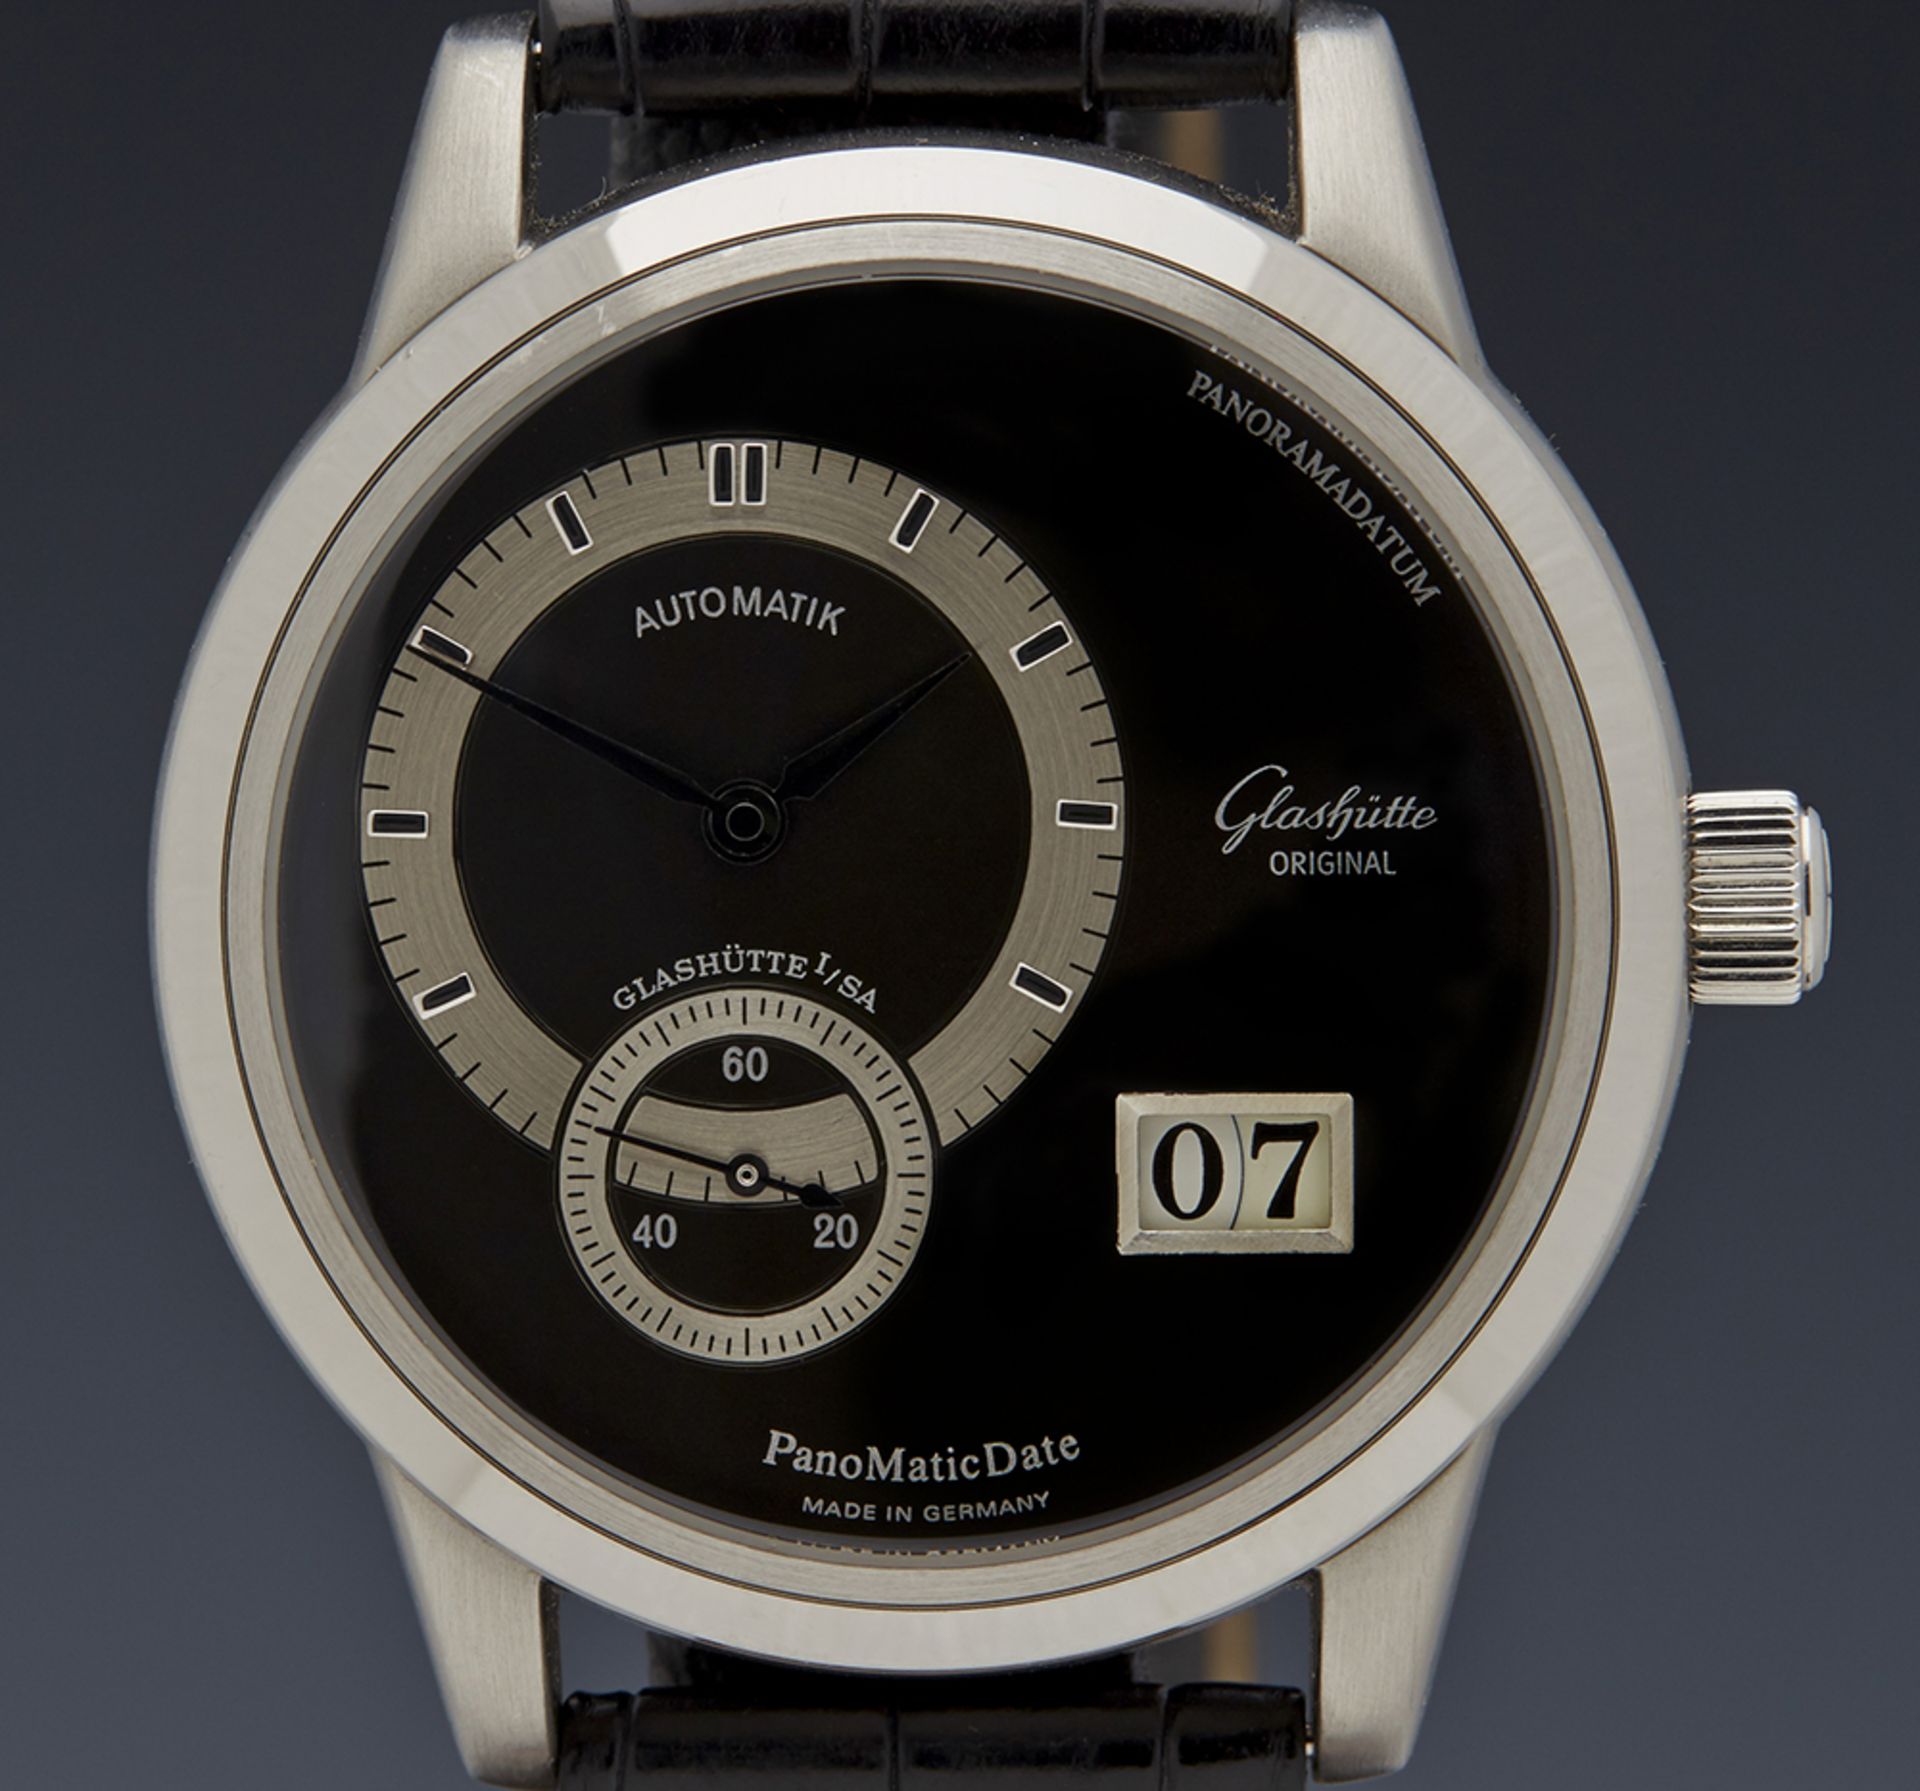 Glashutte, Panomatic Date Platinum Limited Edition 9001030304 - Image 4 of 11